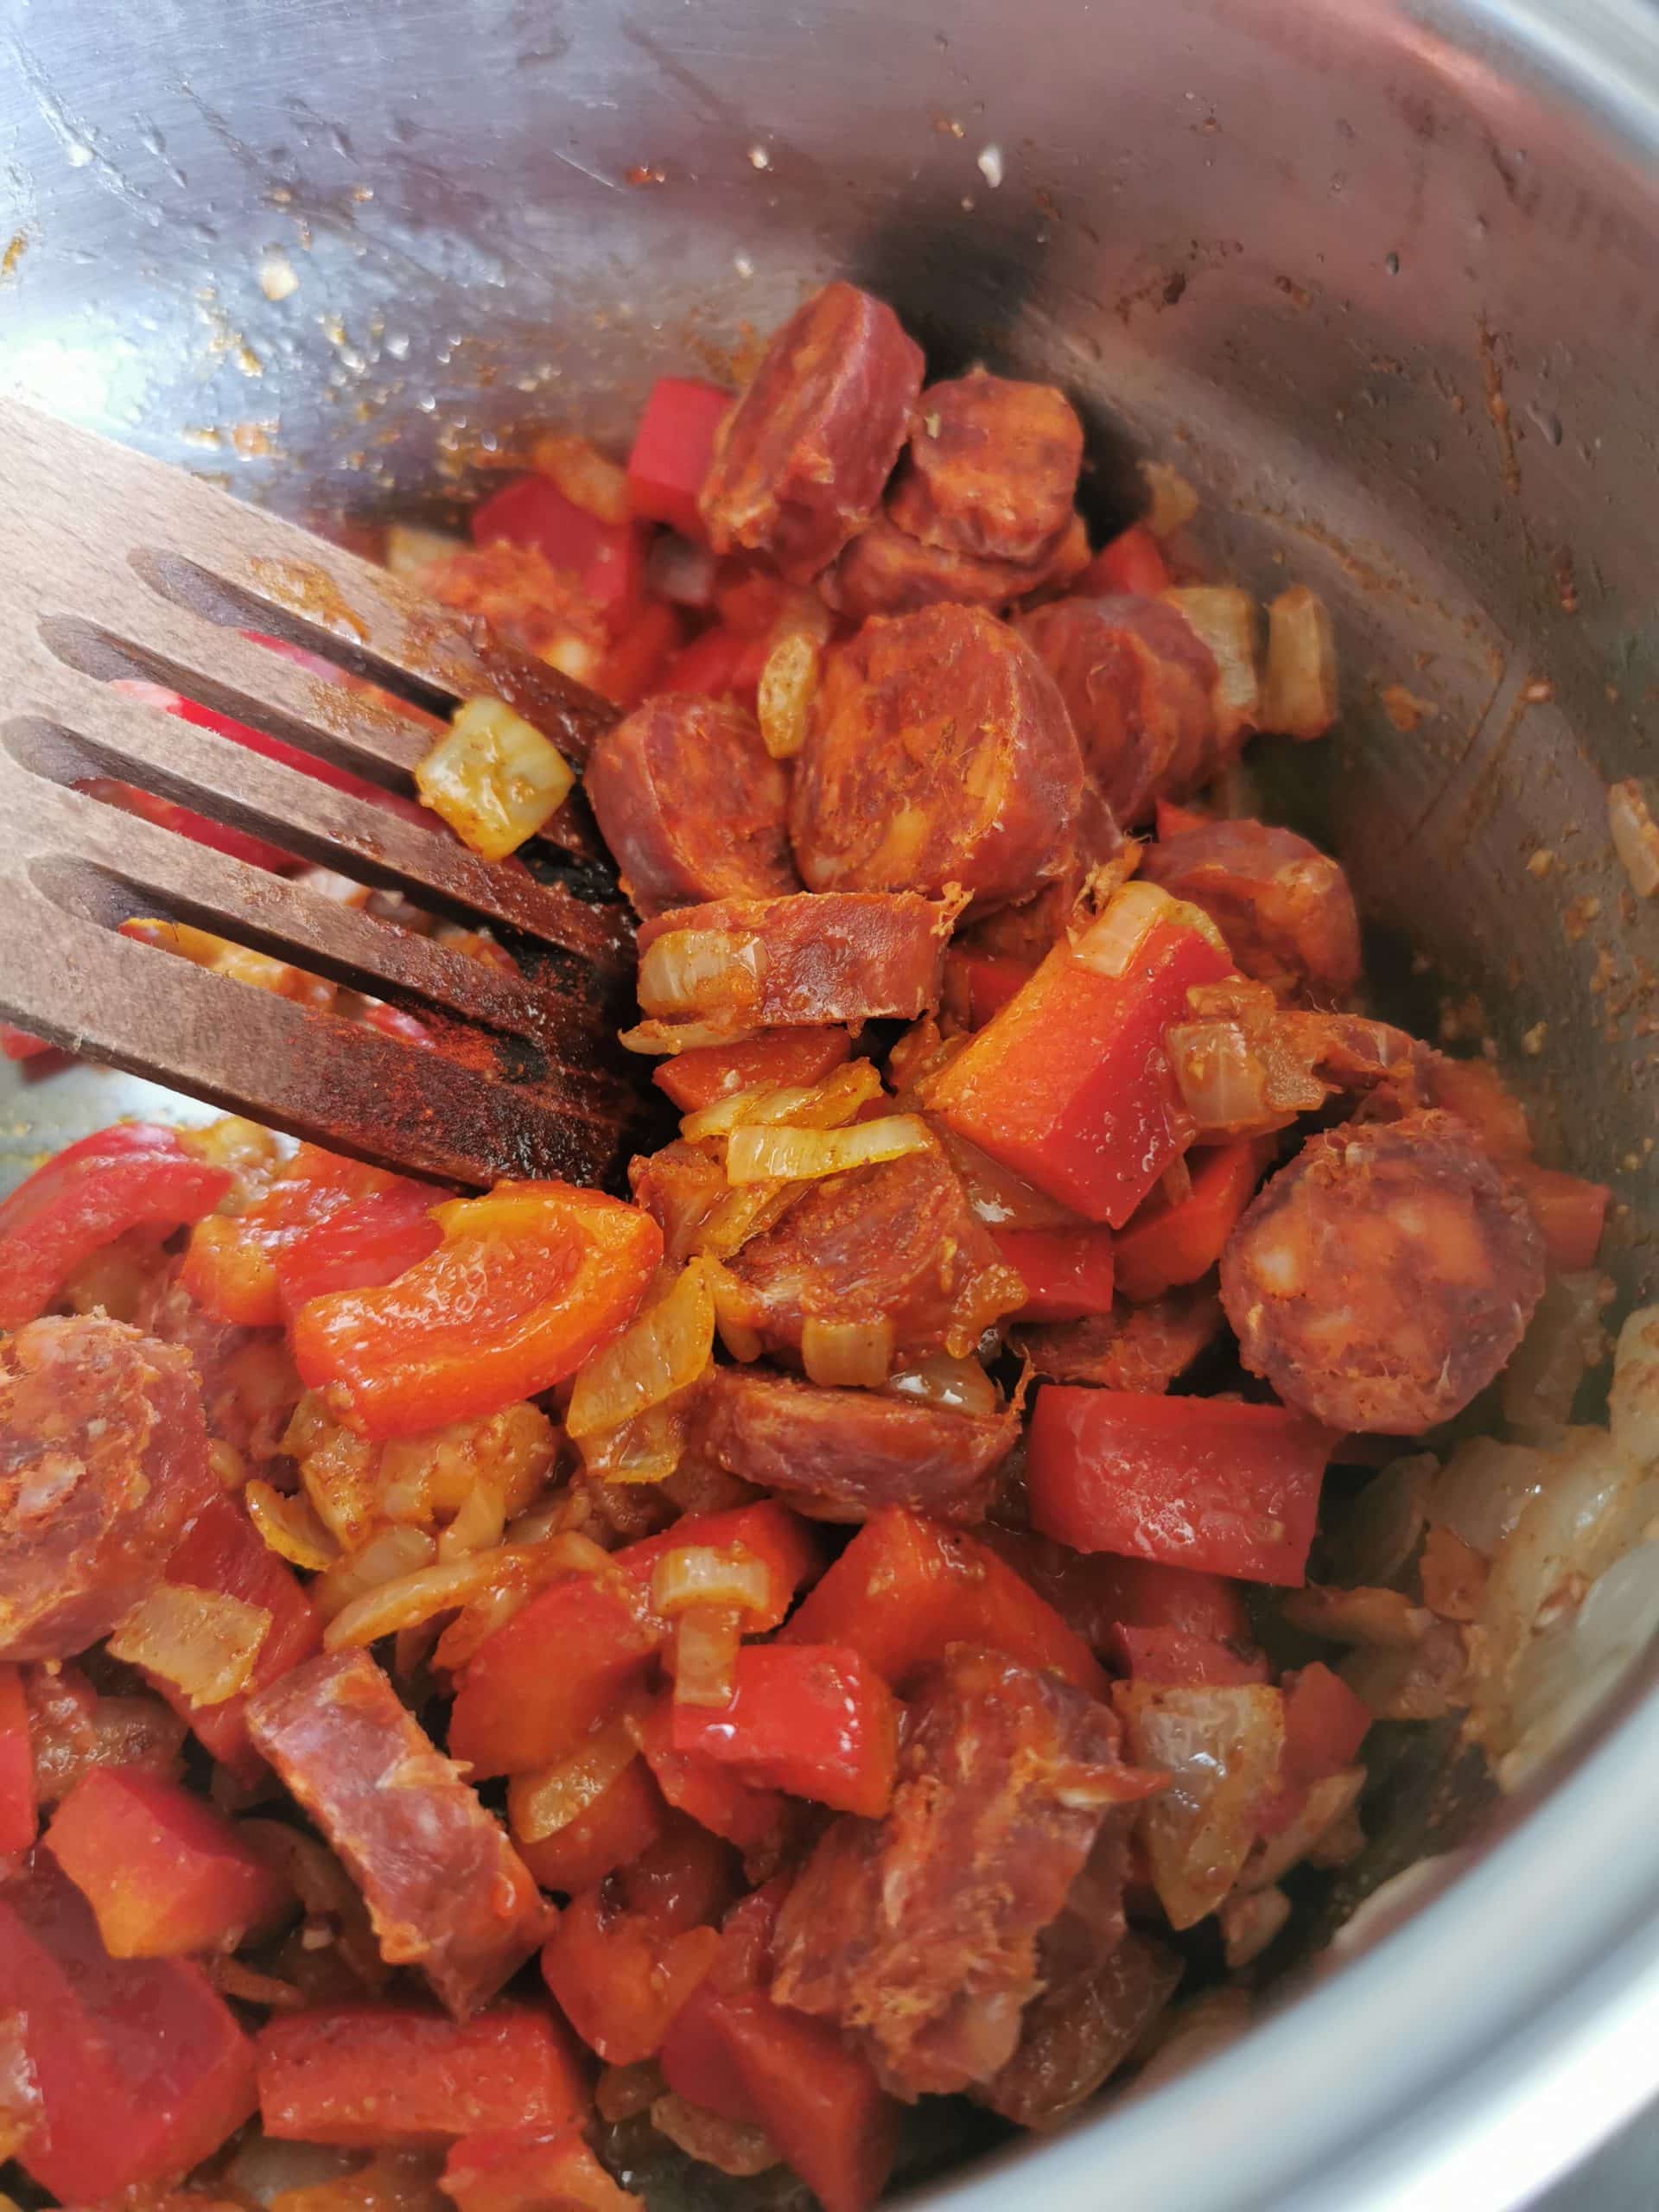 Chorizo sausage, peppers and onion cooking in a saucepan